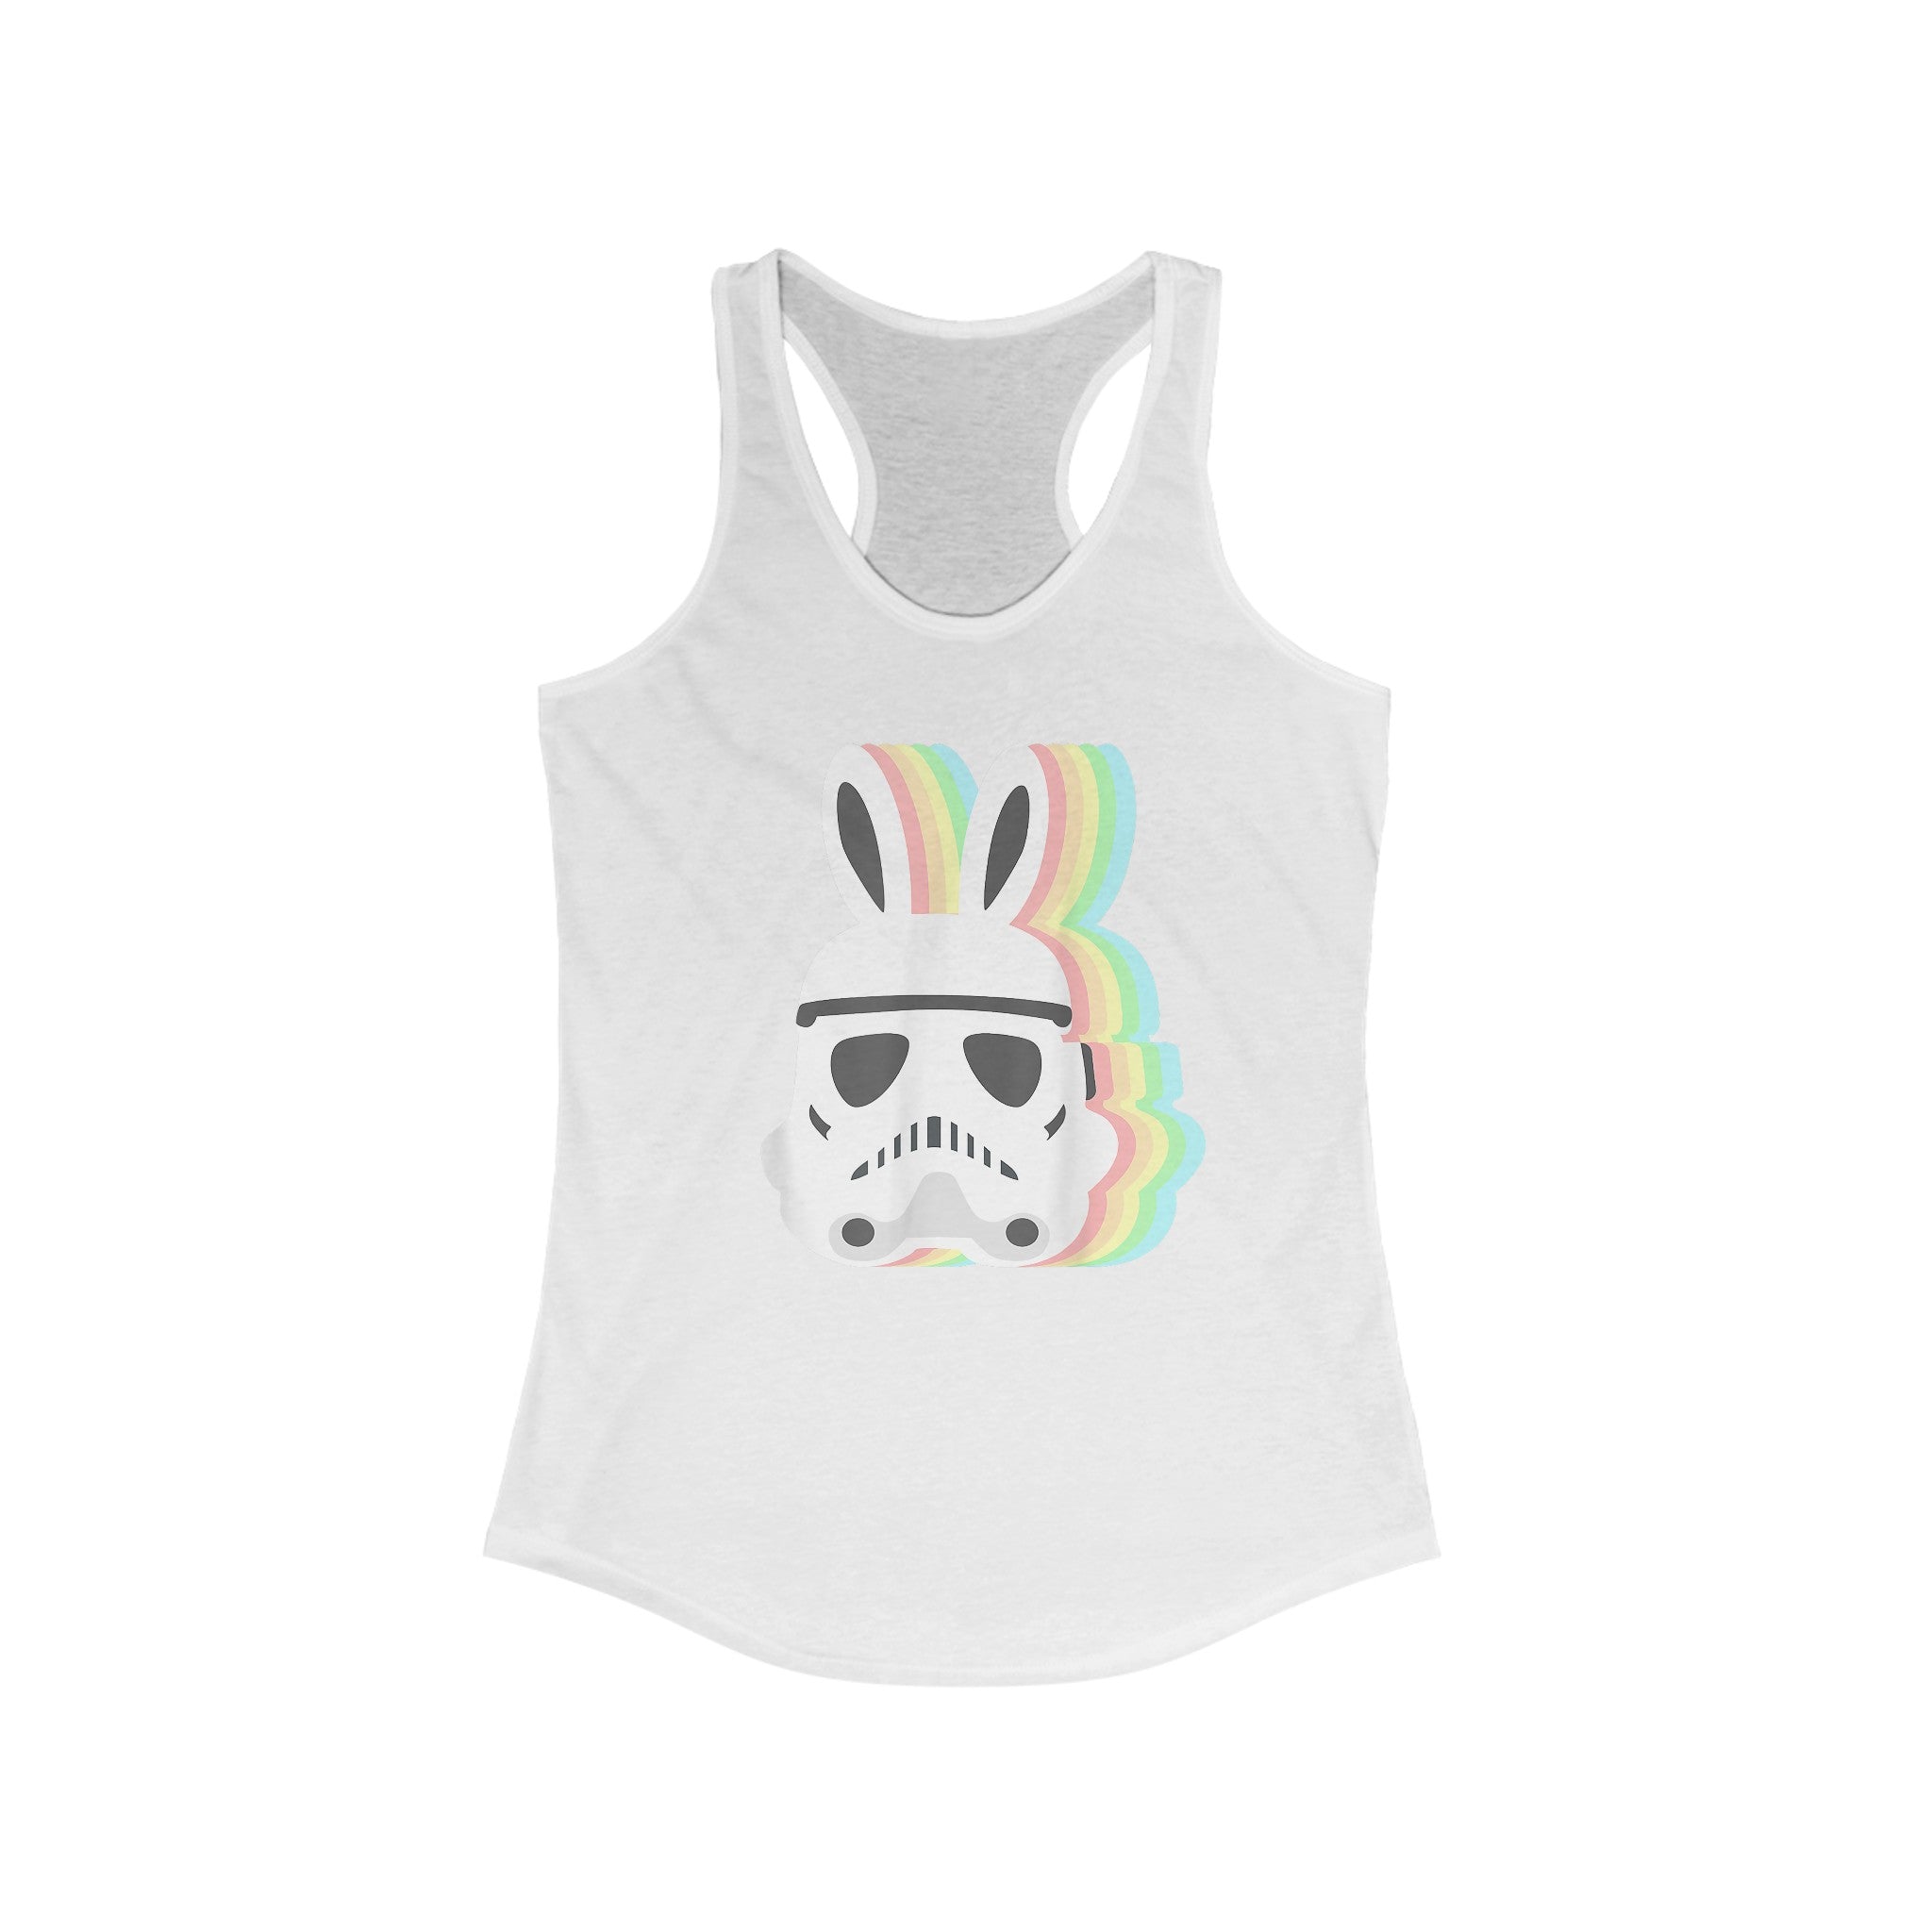 Star Wars Easter Stormtrooper - Women's Racerback Tank featuring a stormtrooper helmet with bunny ears, adorned with pastel rainbow-colored stripes for an Easter-themed Star Wars design.